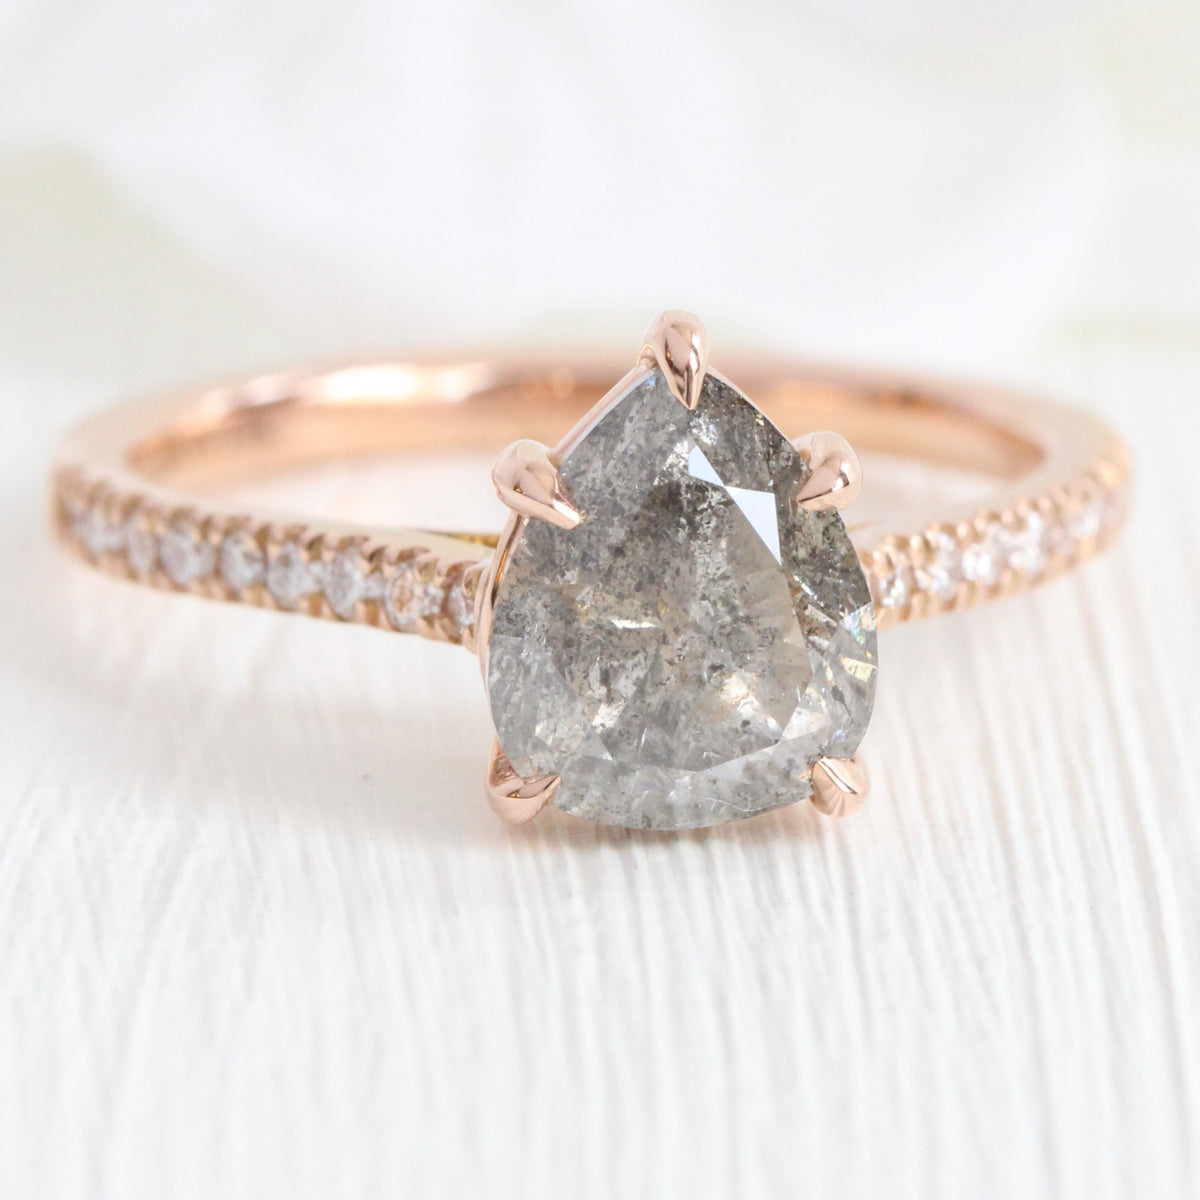 Pear salt and pepper diamond ring rose gold solitaire grey diamond pave ring la more design jewelry